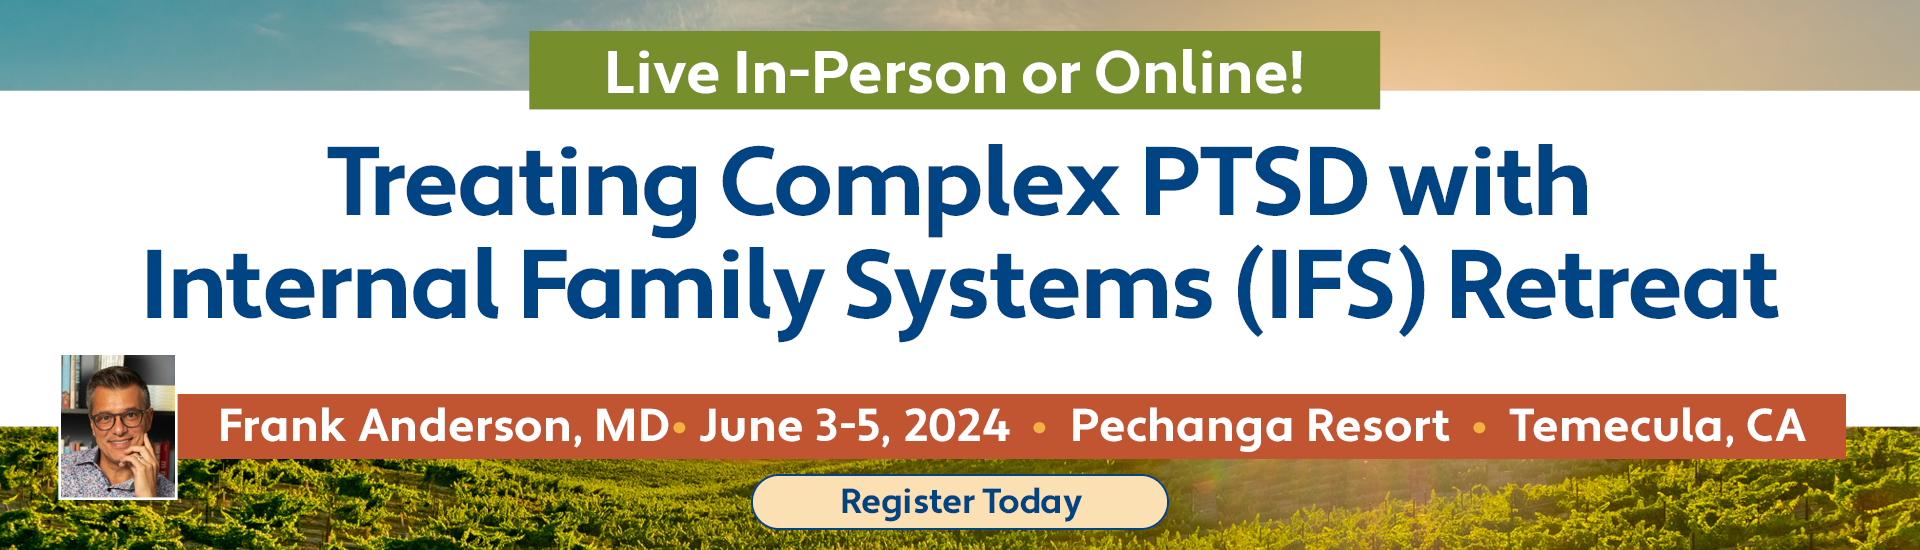 Treating Complex PTSD with Internal Family Systems (IFS) Retreat - Transcending Trauma with Frank Anderson, MD